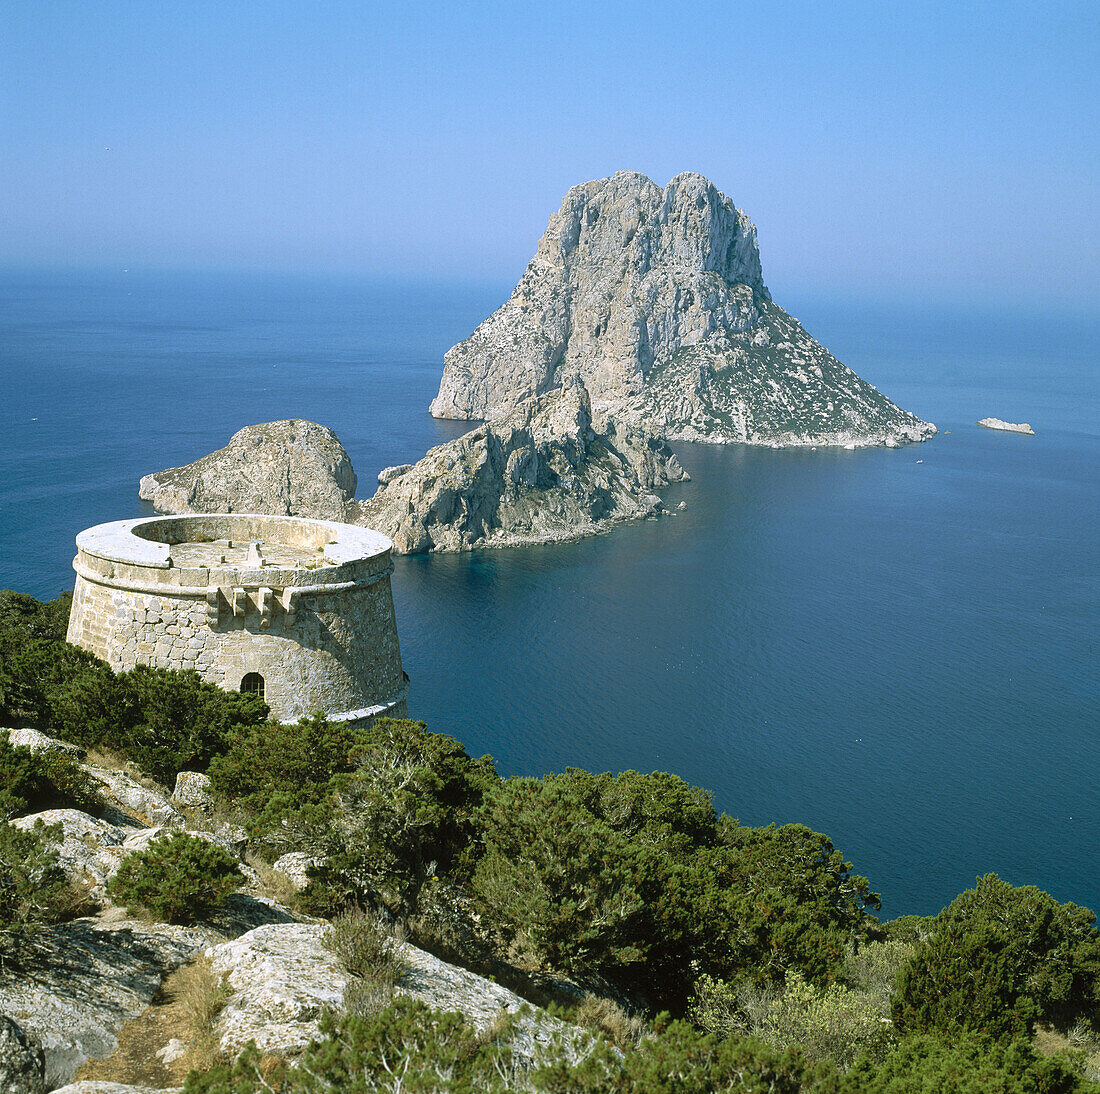 Torre des Savinar and Es Vedrà and Es Vedranell islands. Ibiza, Balearic Islands. Spain